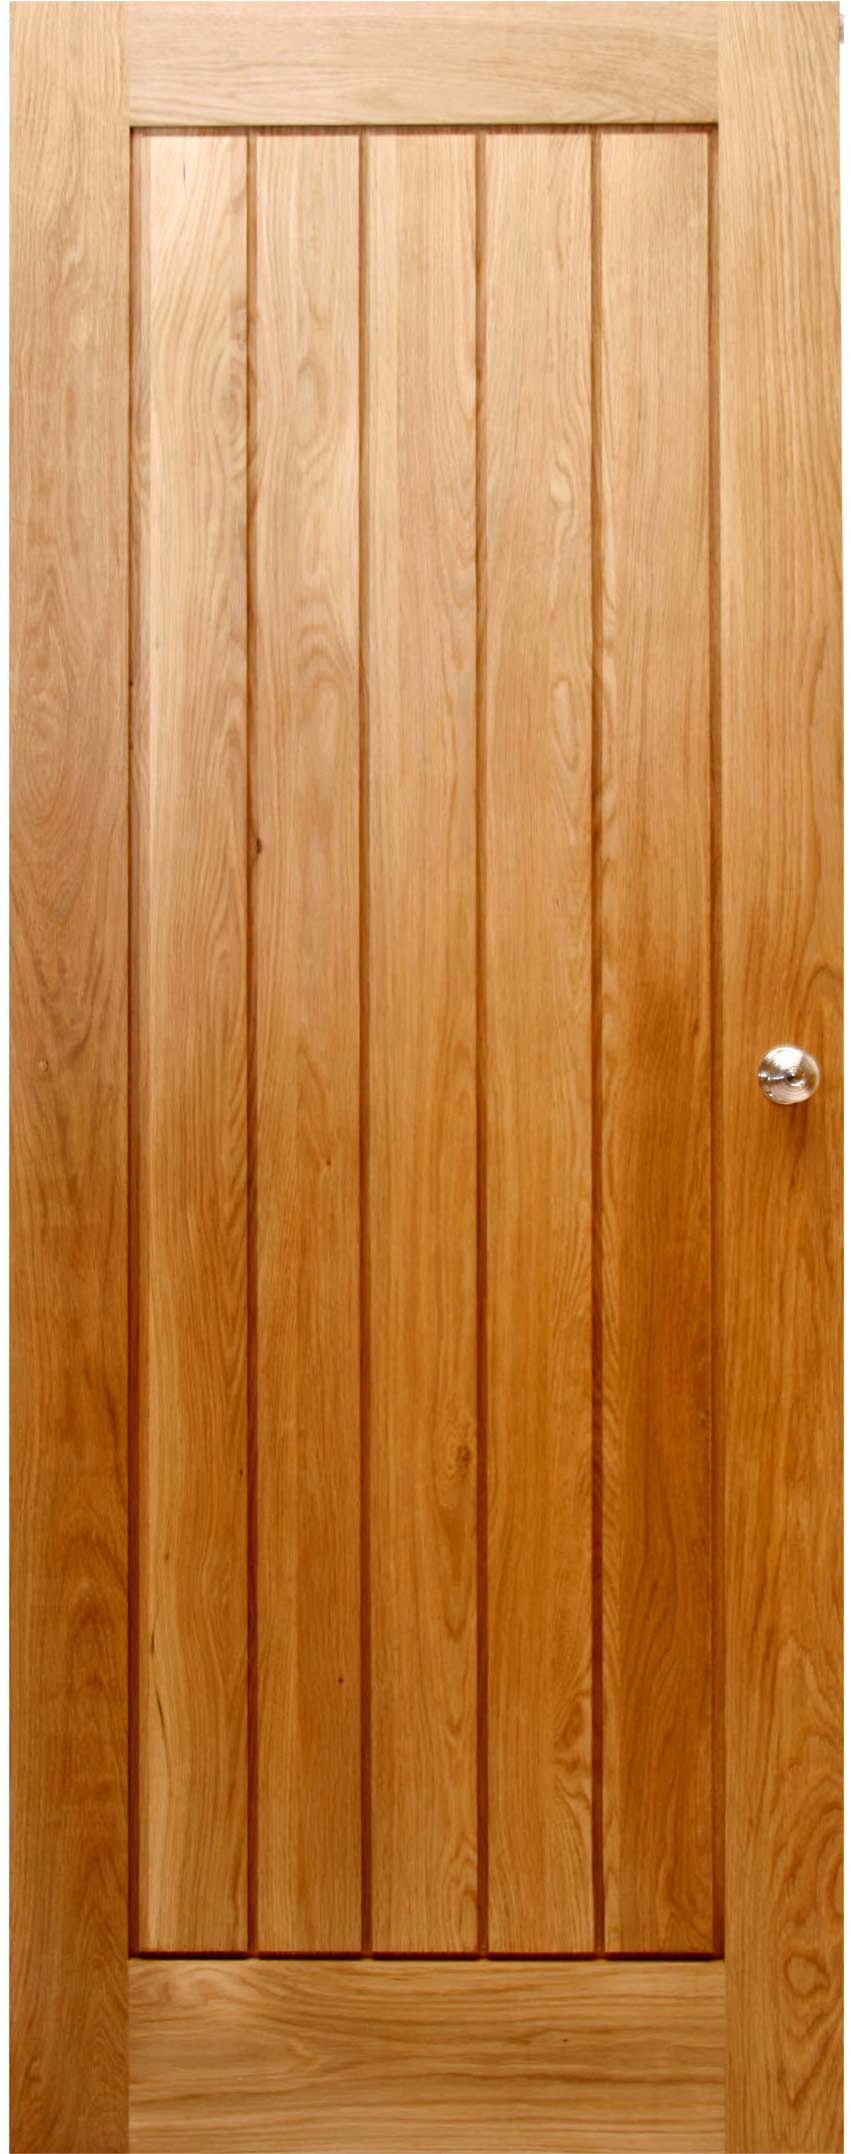 An image of Solid Oak Mexicano Contemporary Style Internal Door - Prime Grade Solid Oak With...